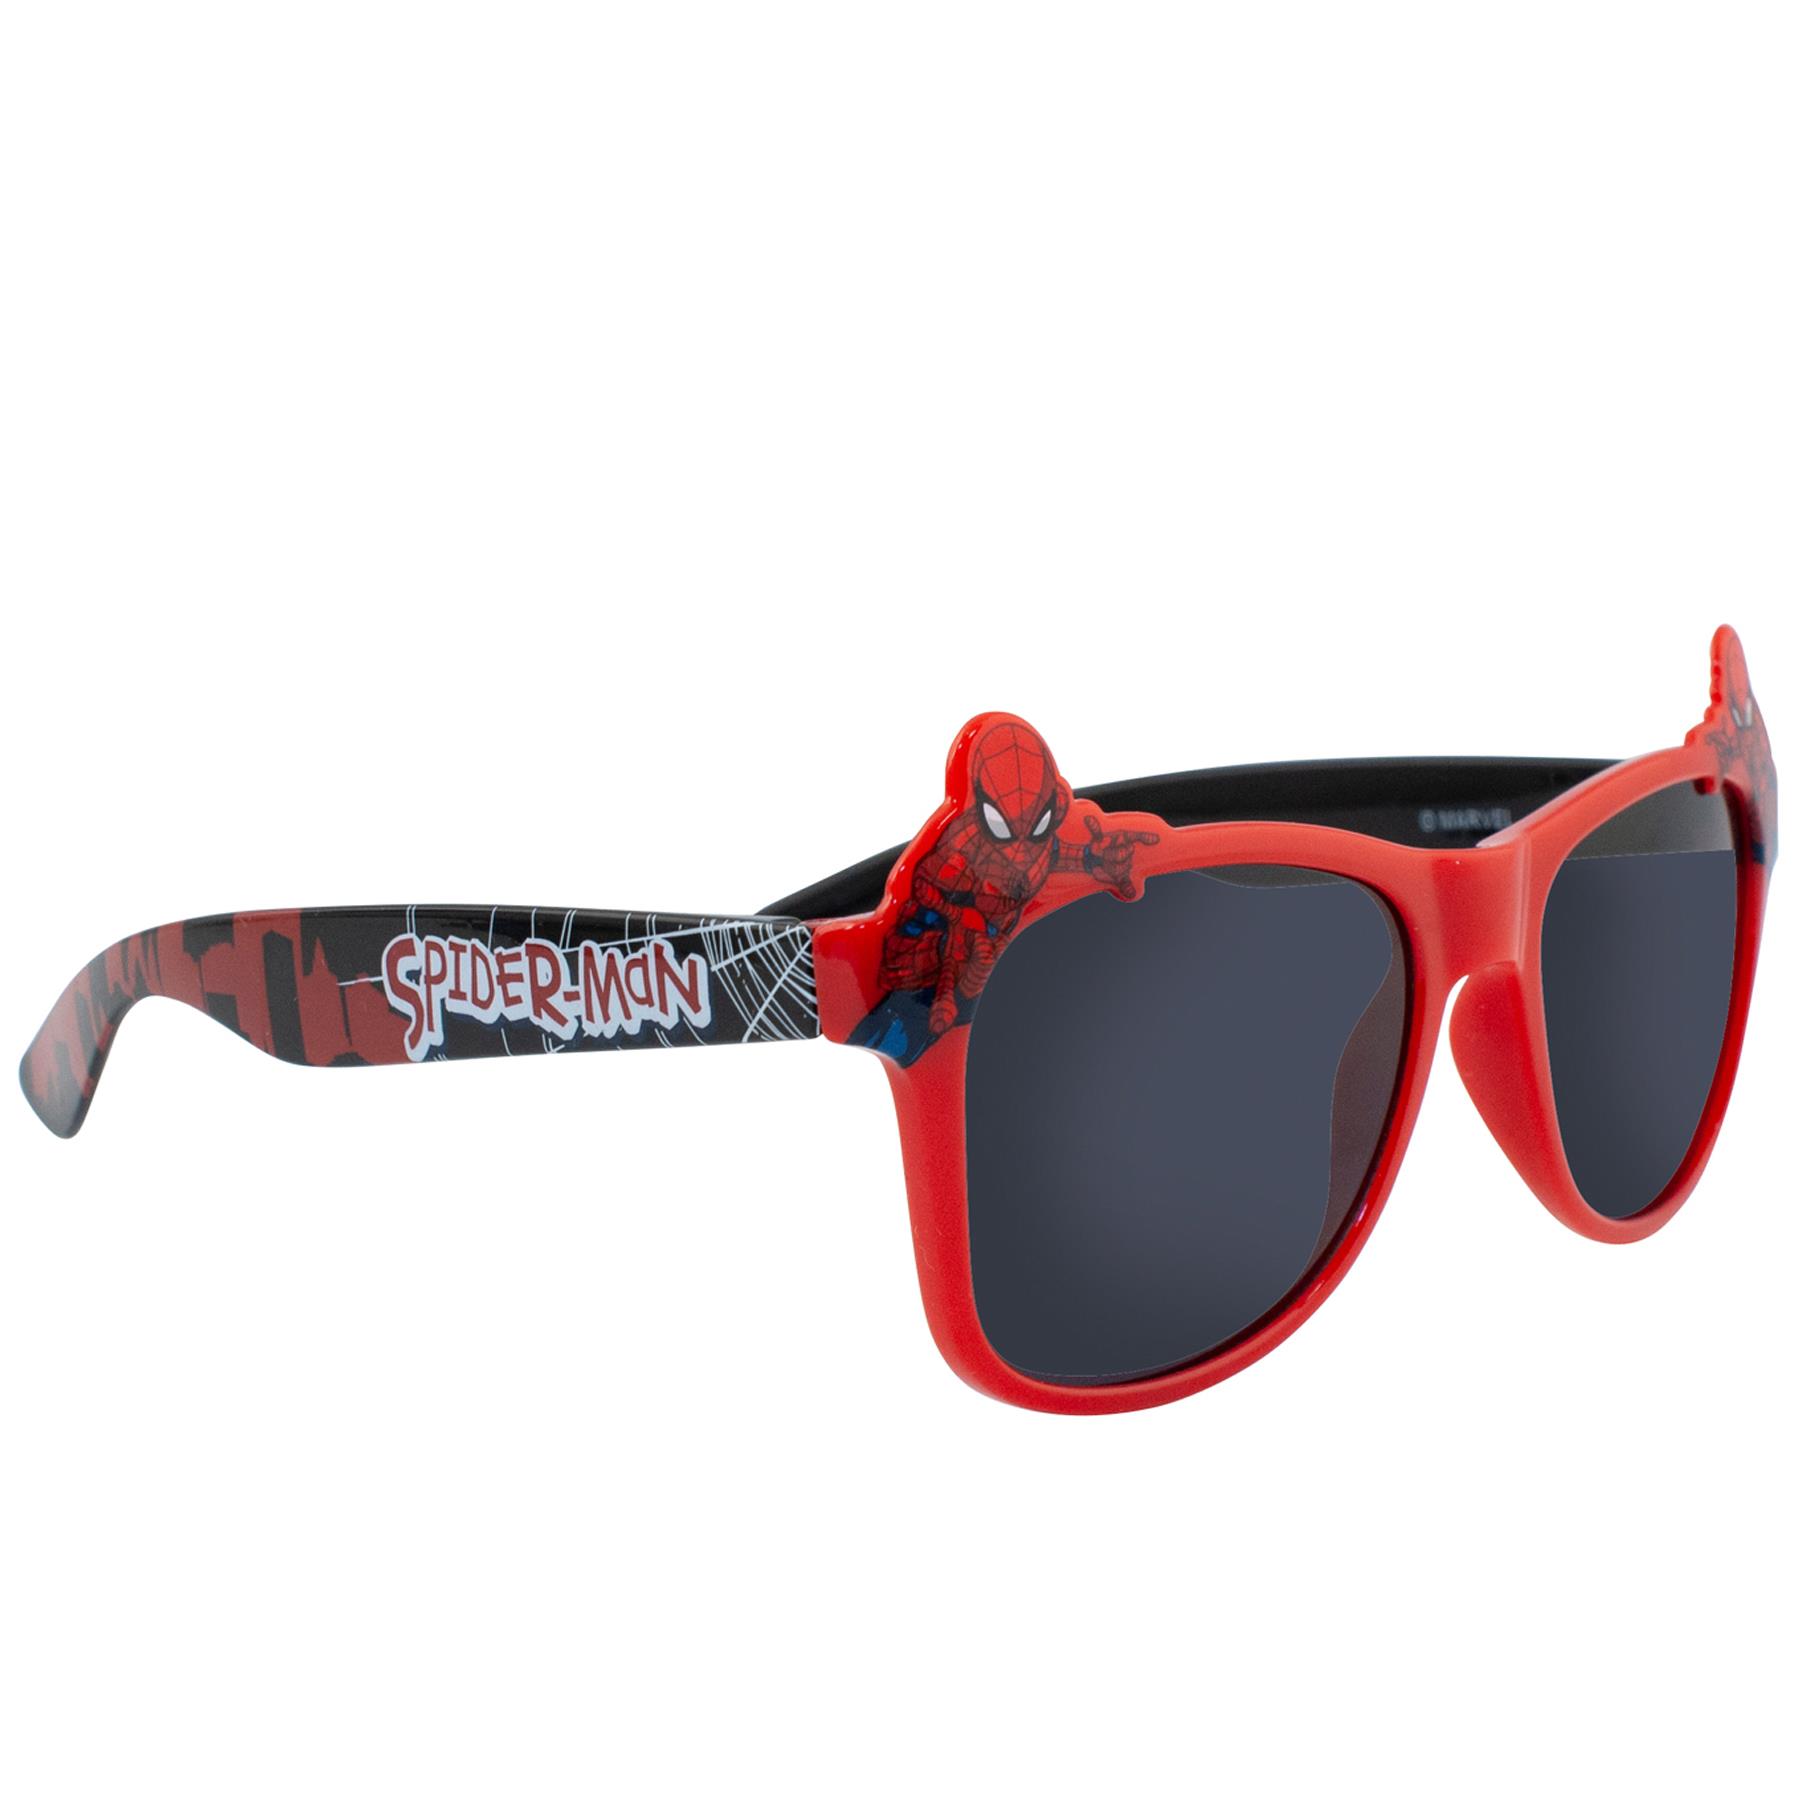 Superheroes Children's Sunglasses UV protection for Holiday - Marvel Spiderman SP21